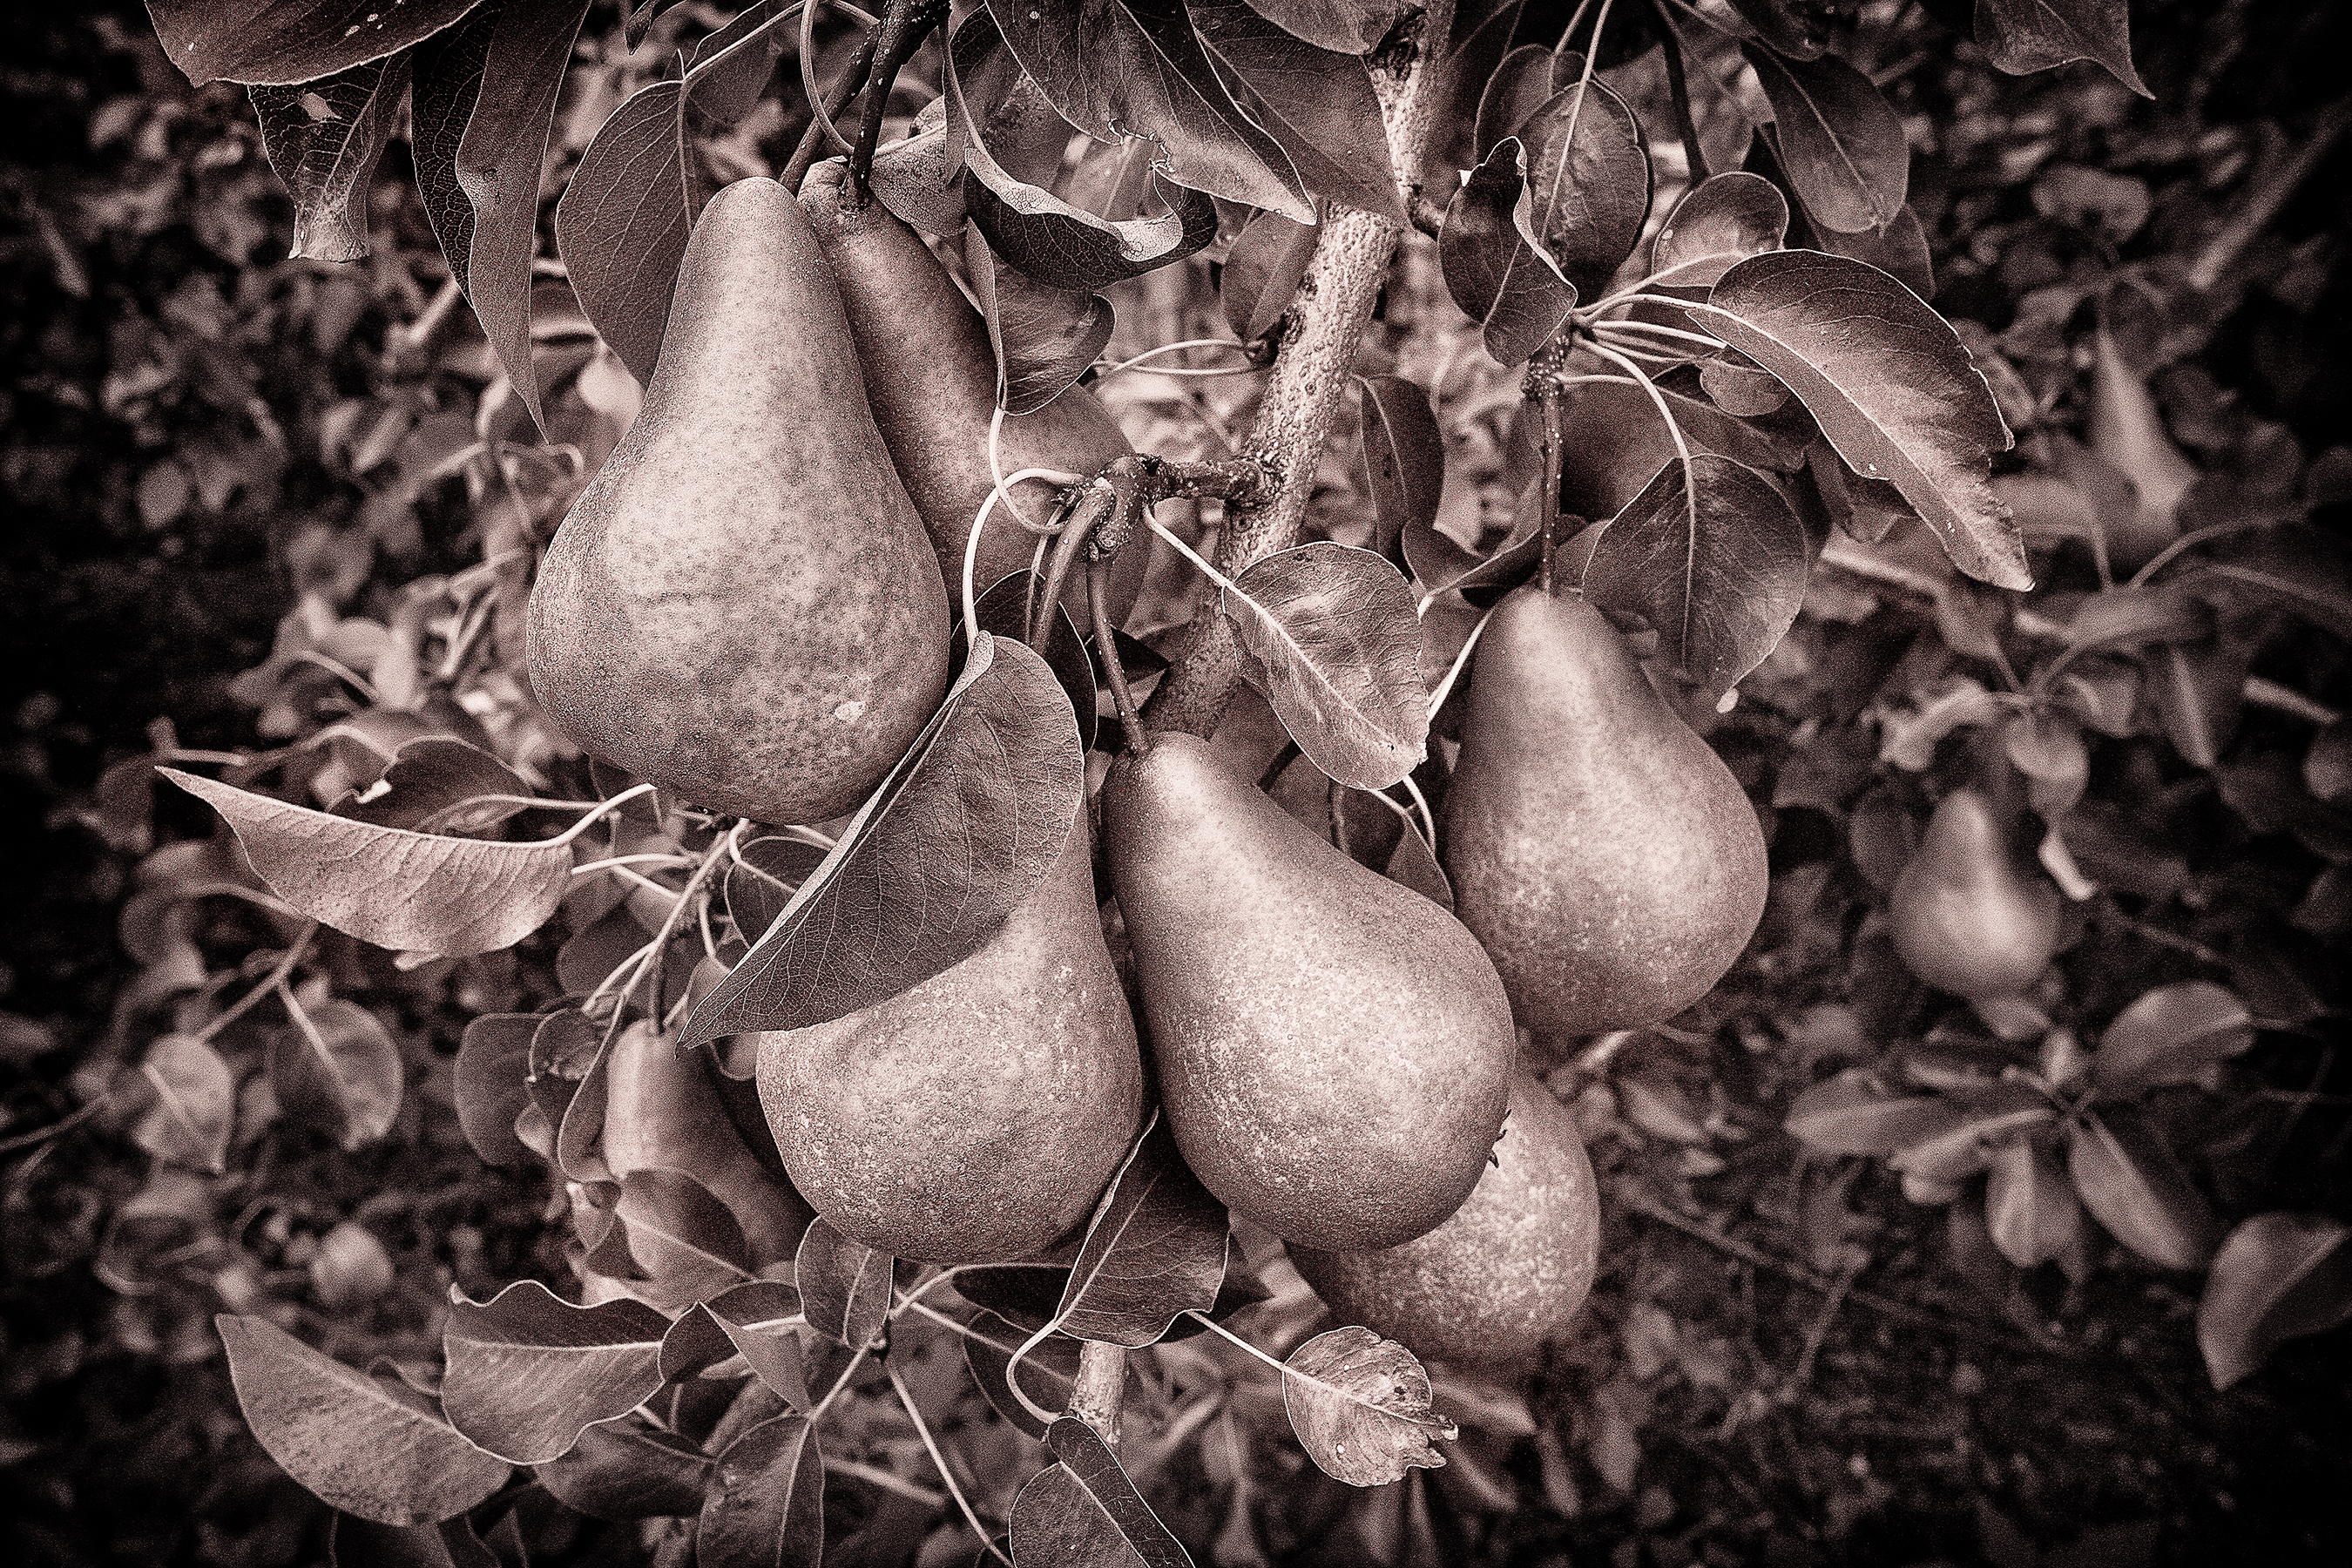 Pears, Beltane Orchards